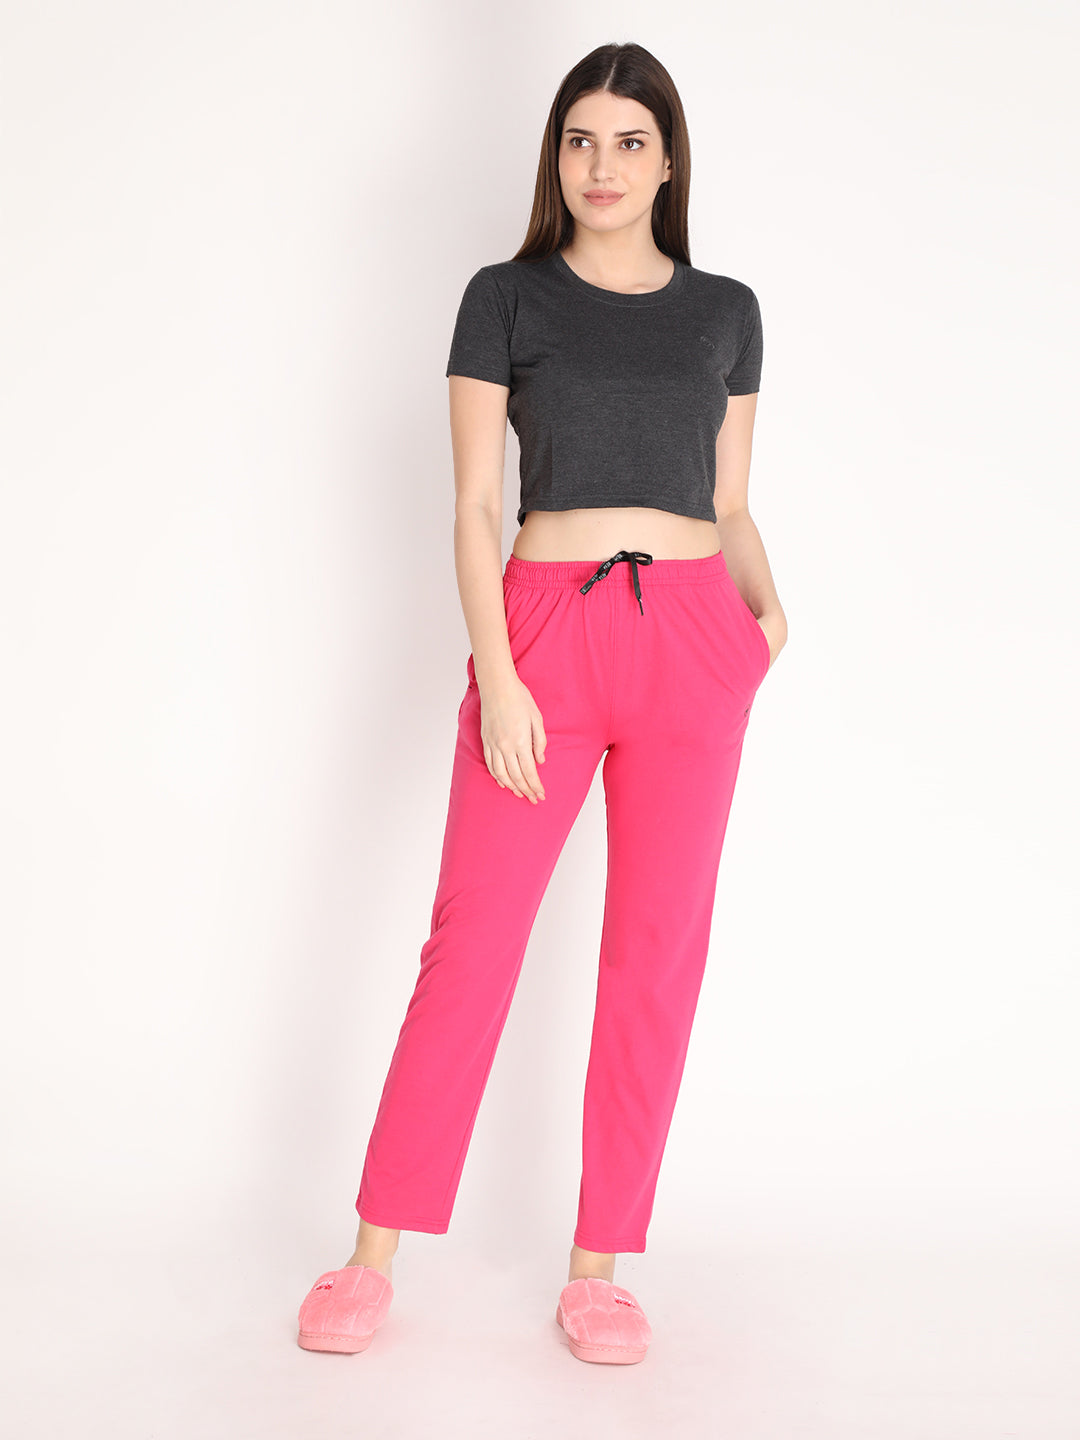 Hot Pink Pants Dressy Hot Weather Outfits For Women (6 ideas & outfits) |  Lookastic